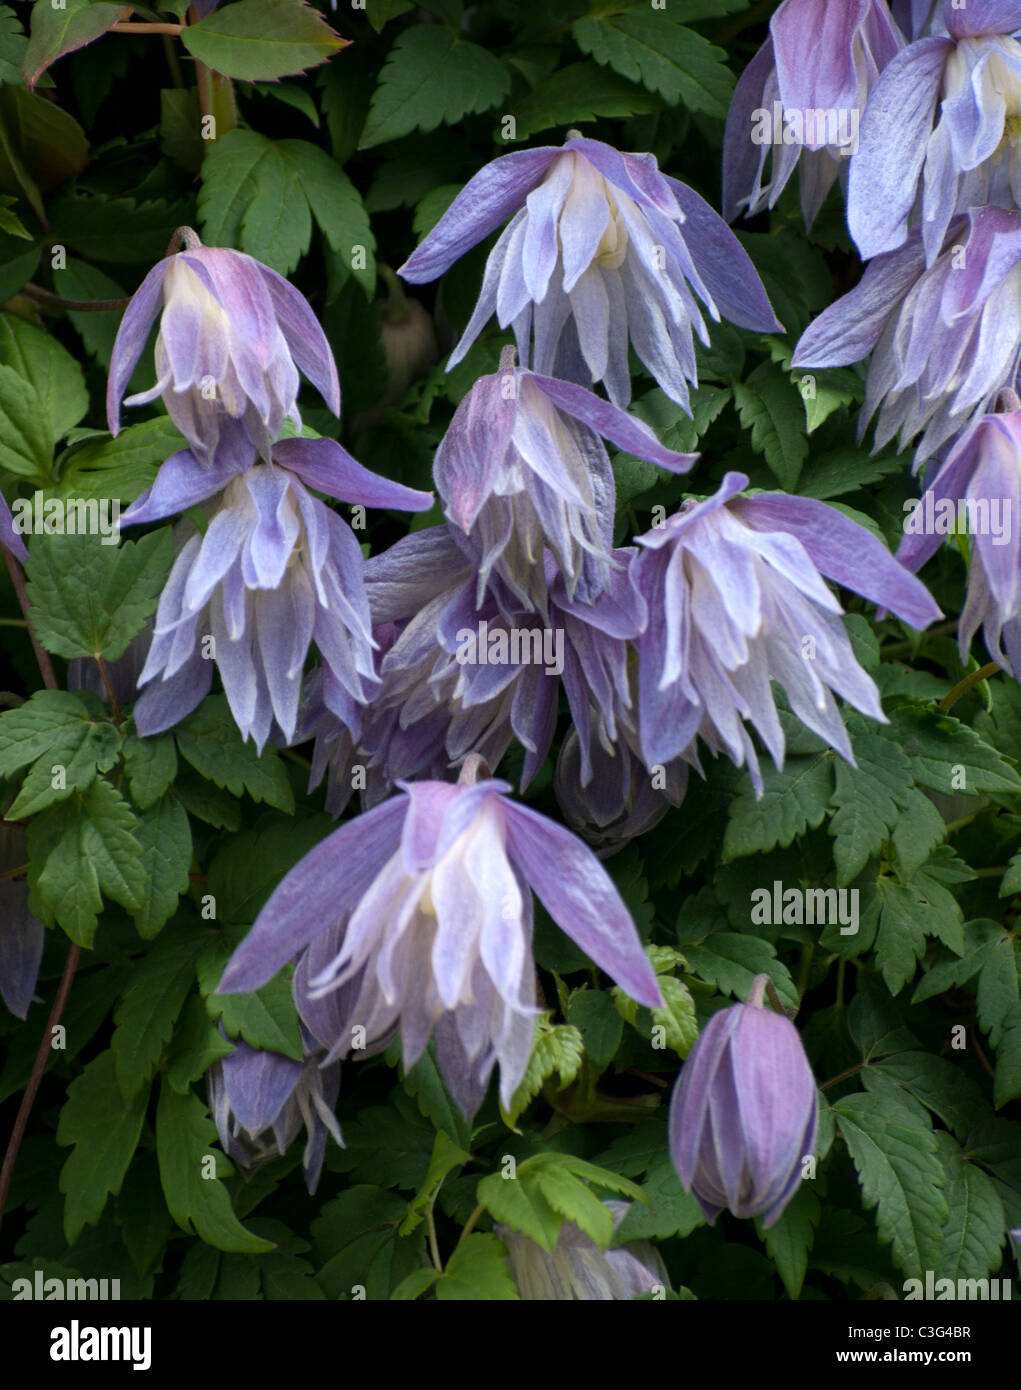 Clematis Macropetala Maidwell Hall Banque D'Images